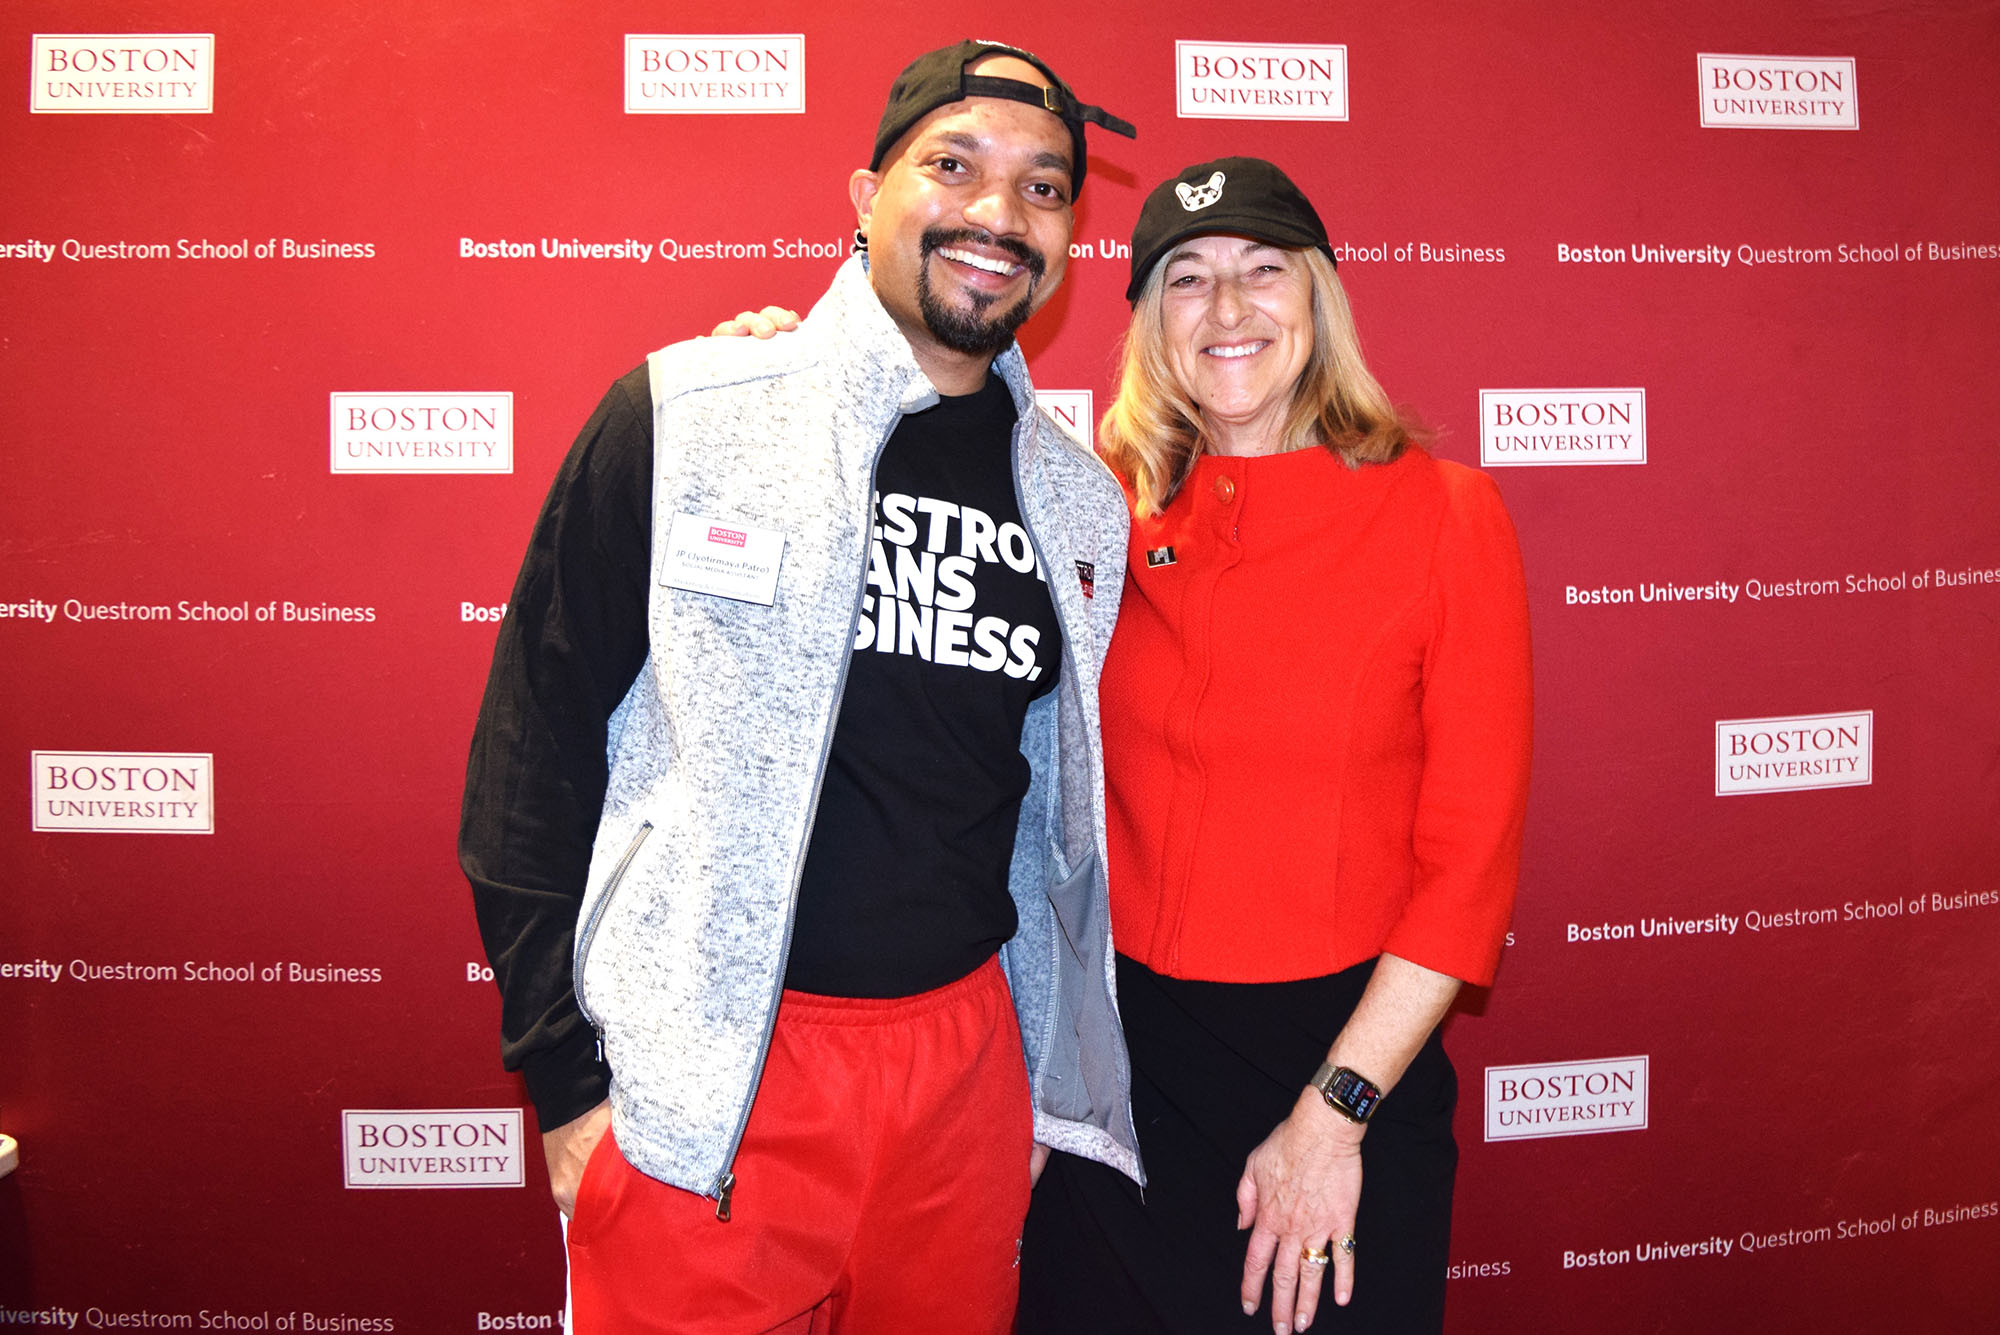 Photo: A picture of a man and a woman smiling and posing for a picture. They are in front of a red background with the "Boston University" logo